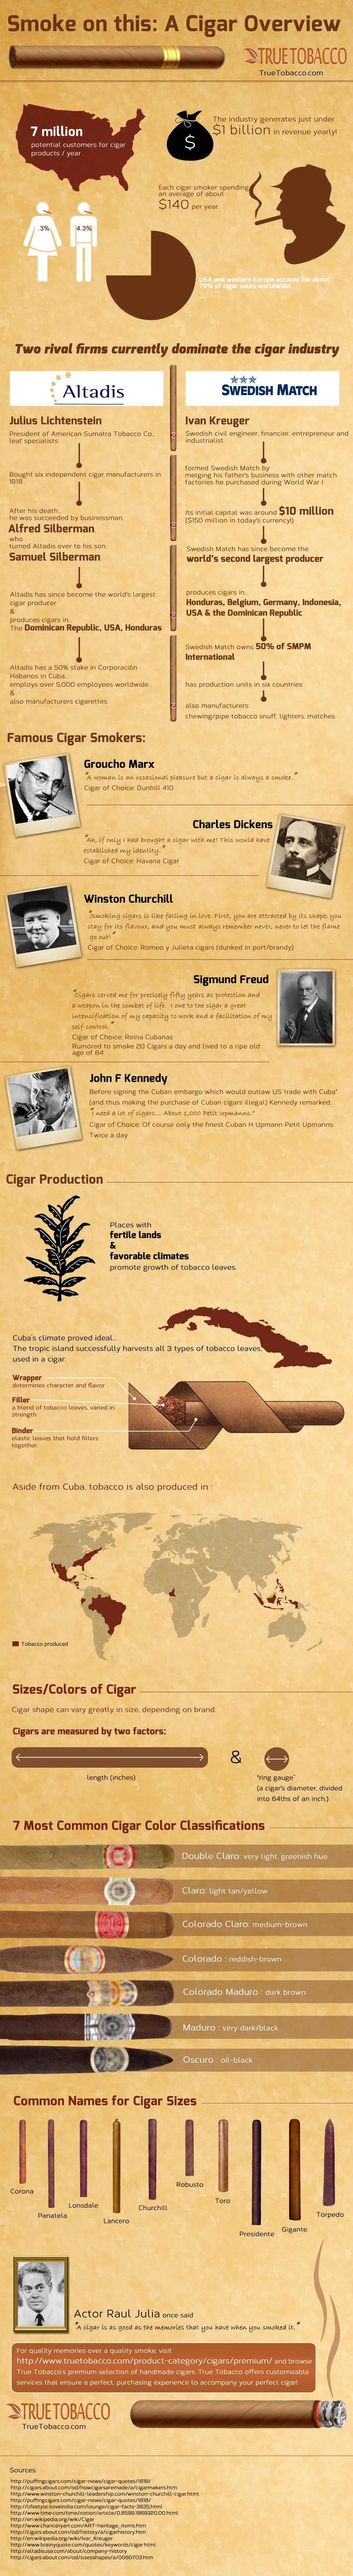 Smoke On This: A Cigar Overview